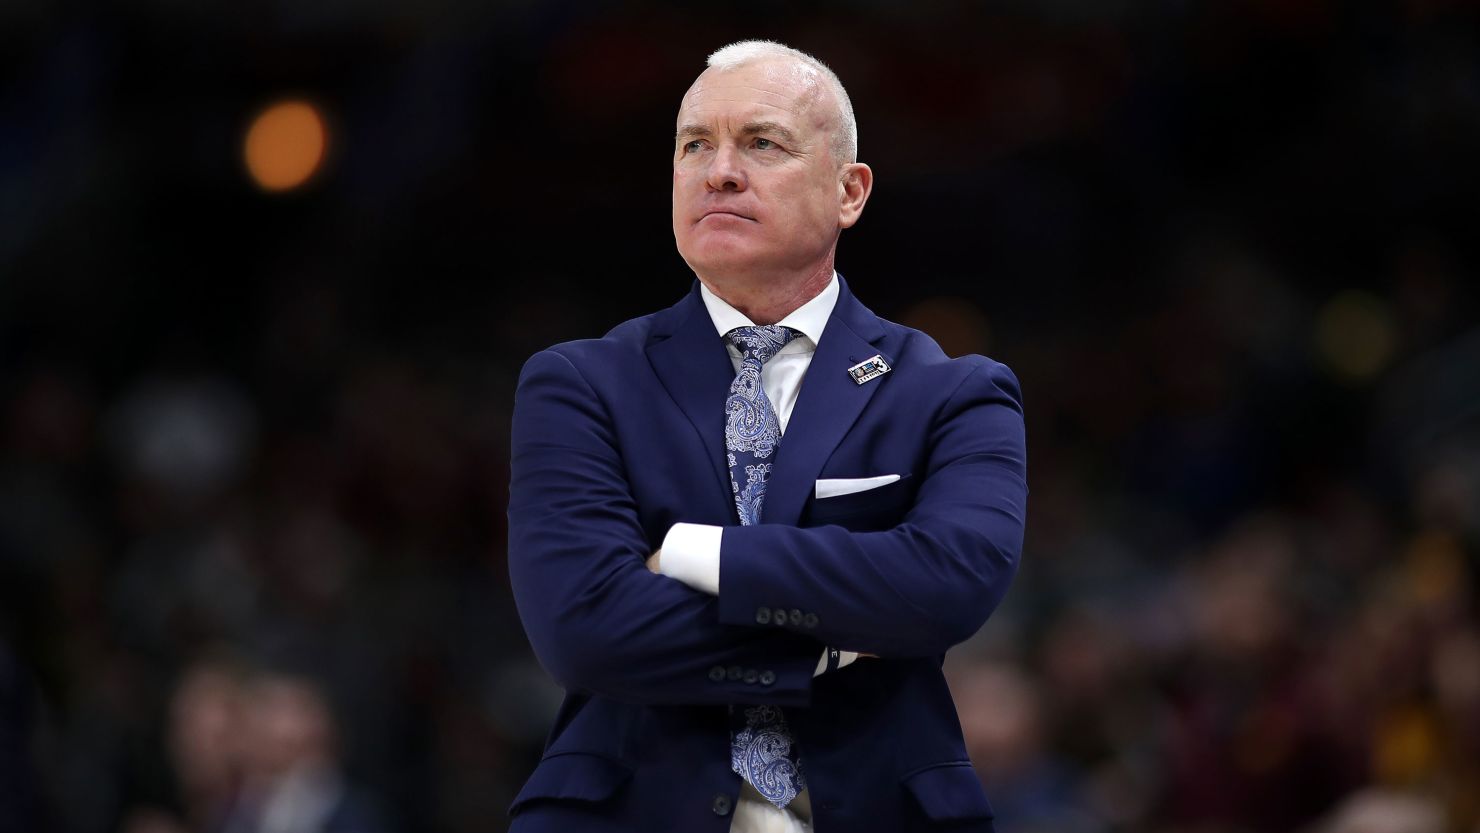 Pat Chambers has resigned as Penn State's basketball coach.